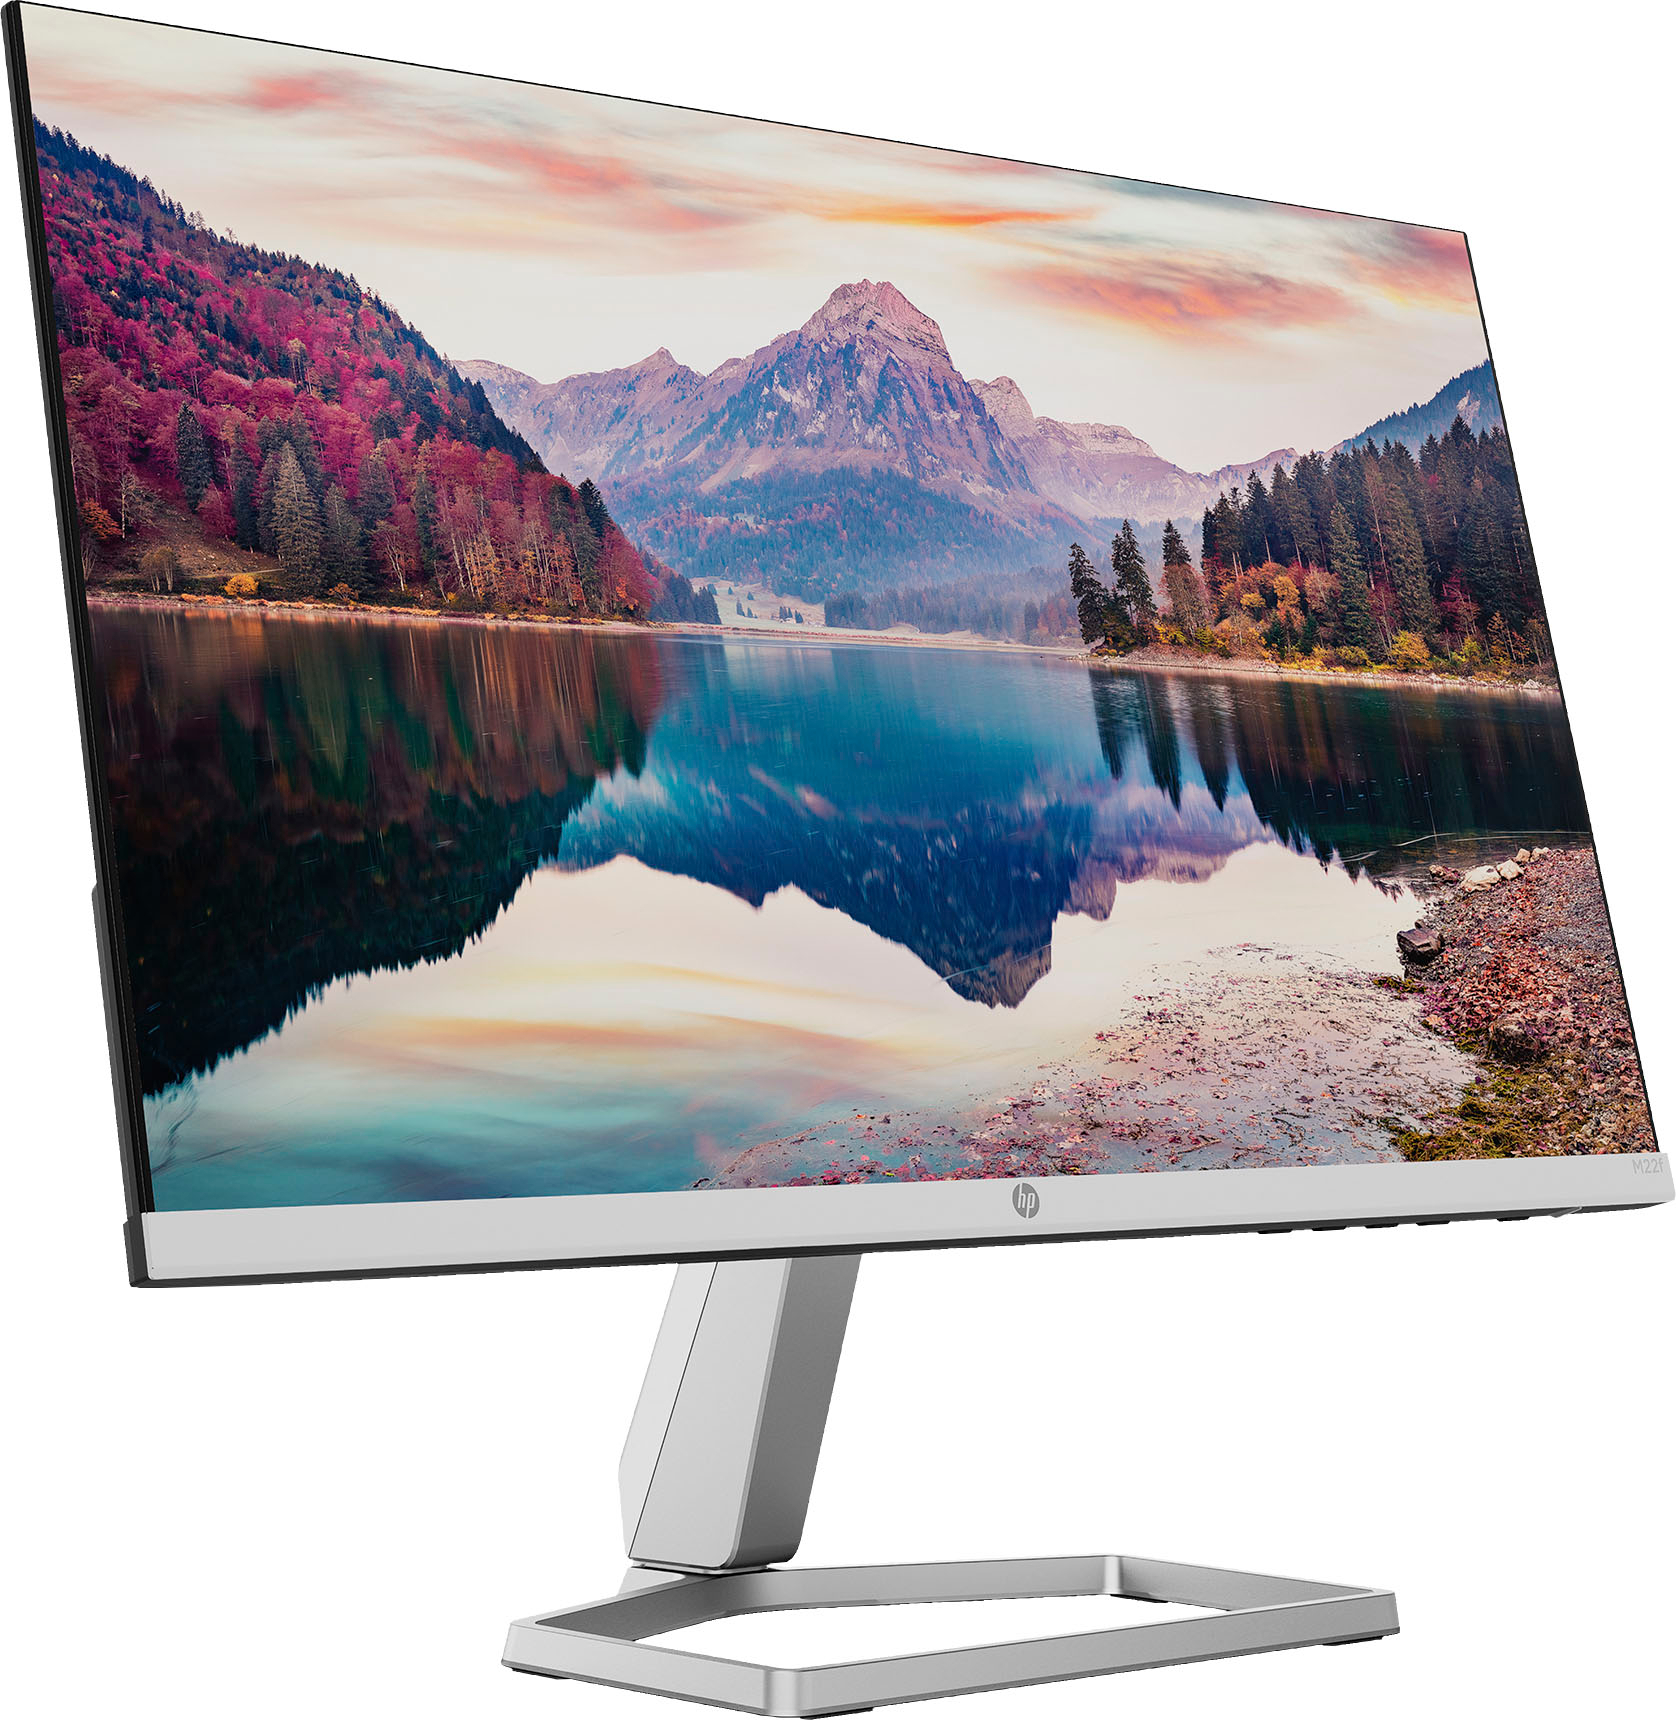 HP 27 IPS LED FHD FreeSync Monitor with Adjustable Height (HDMI, VGA)  Silver & Black M27h - Best Buy